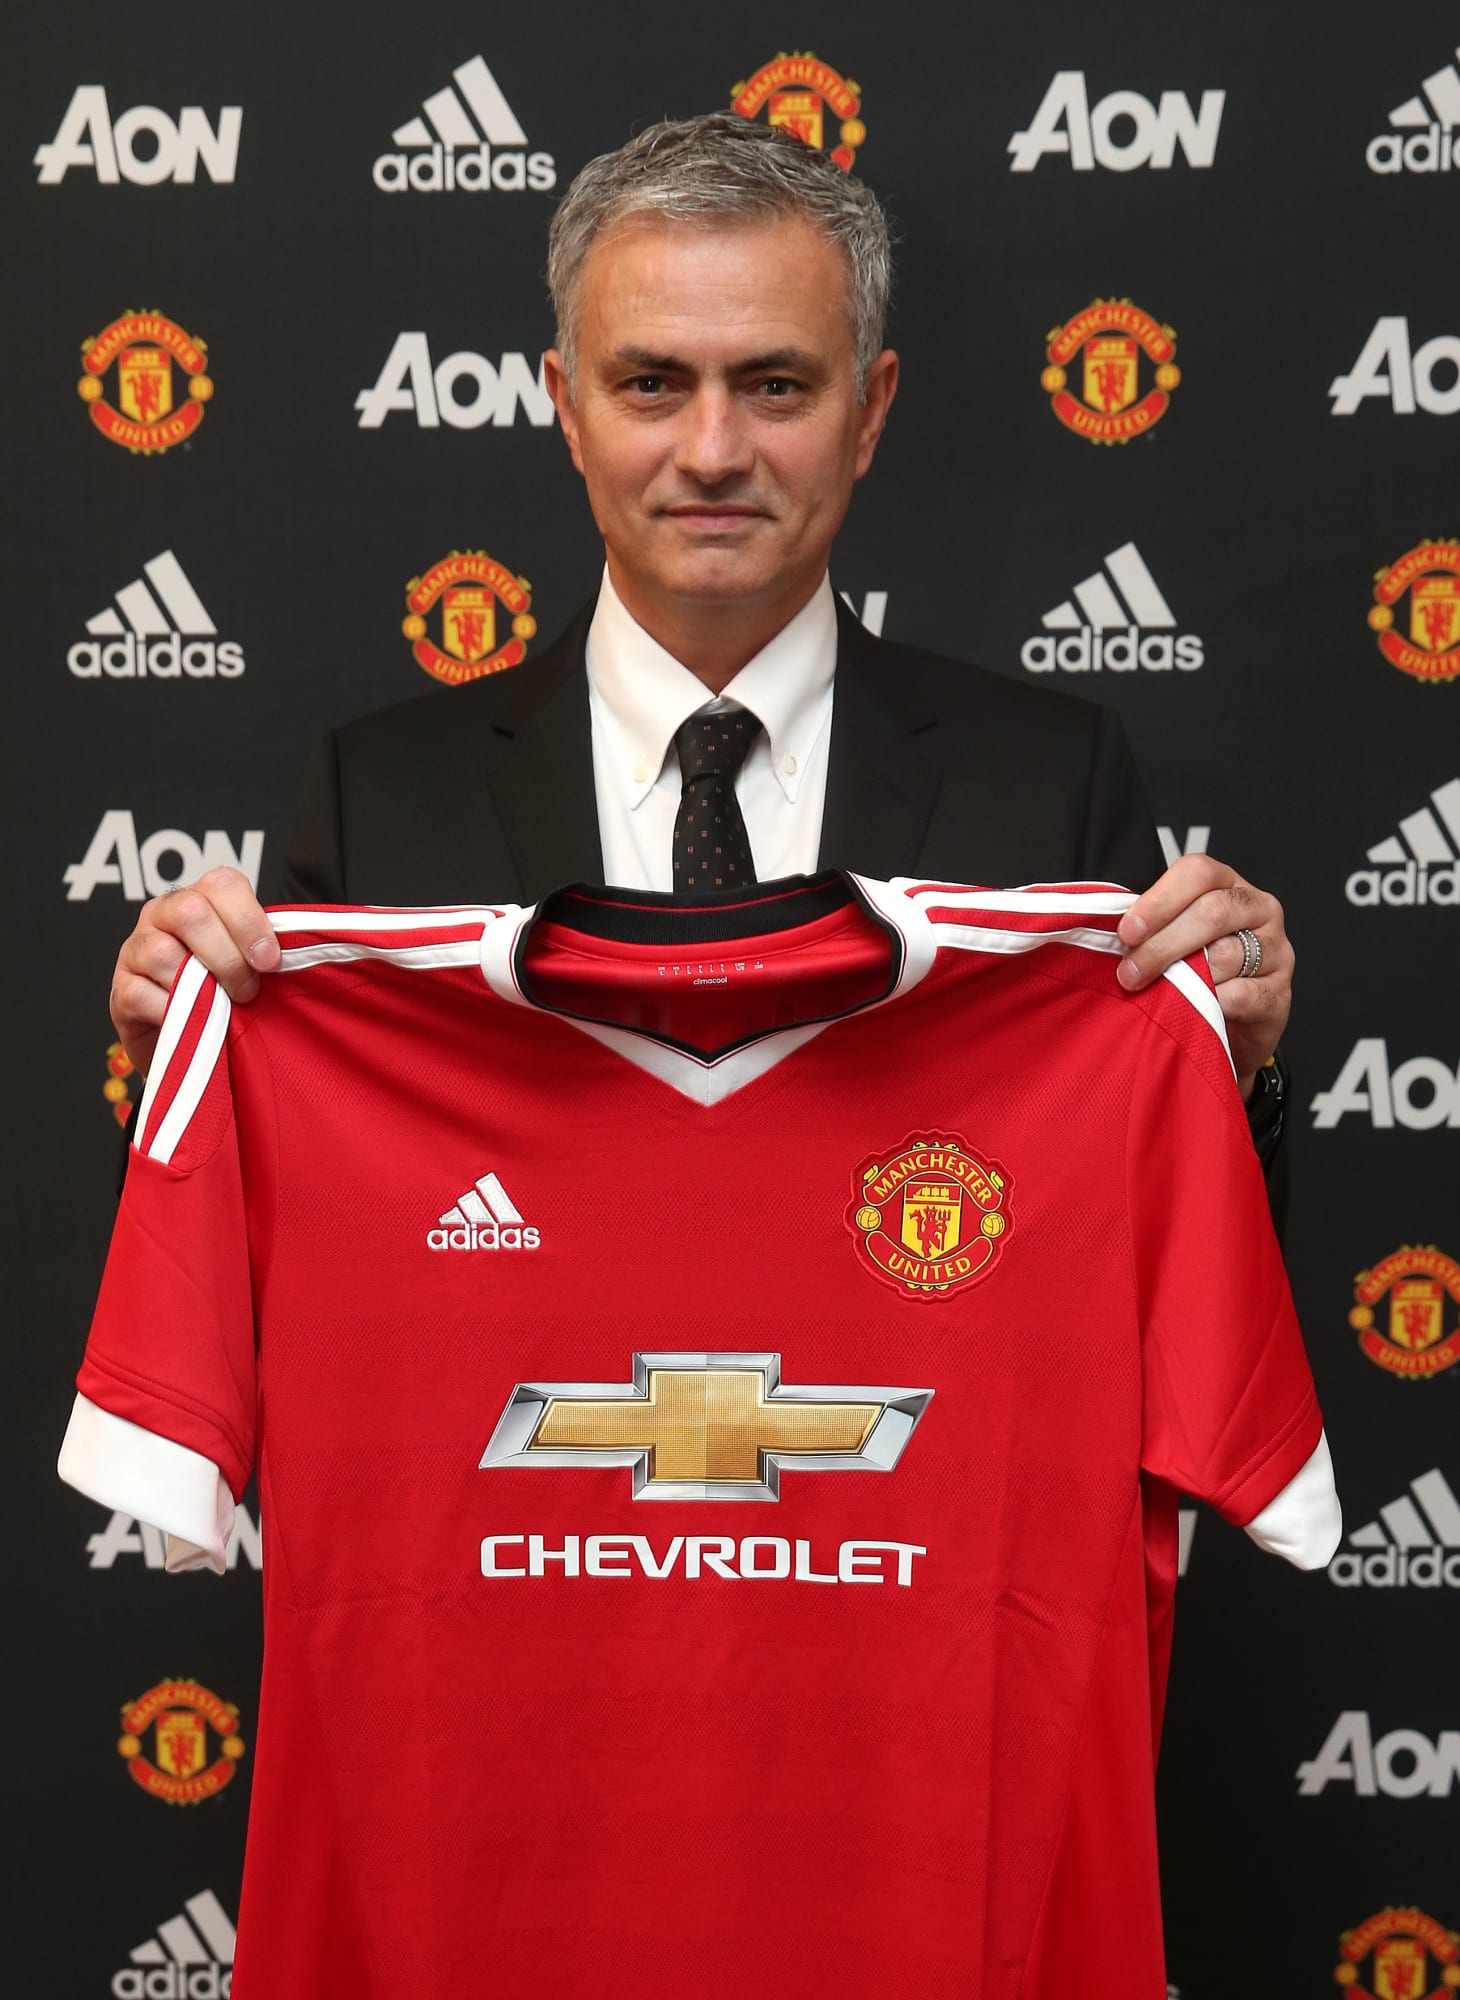 Jose Mourinho finally joins Instagram (and Manchester United)